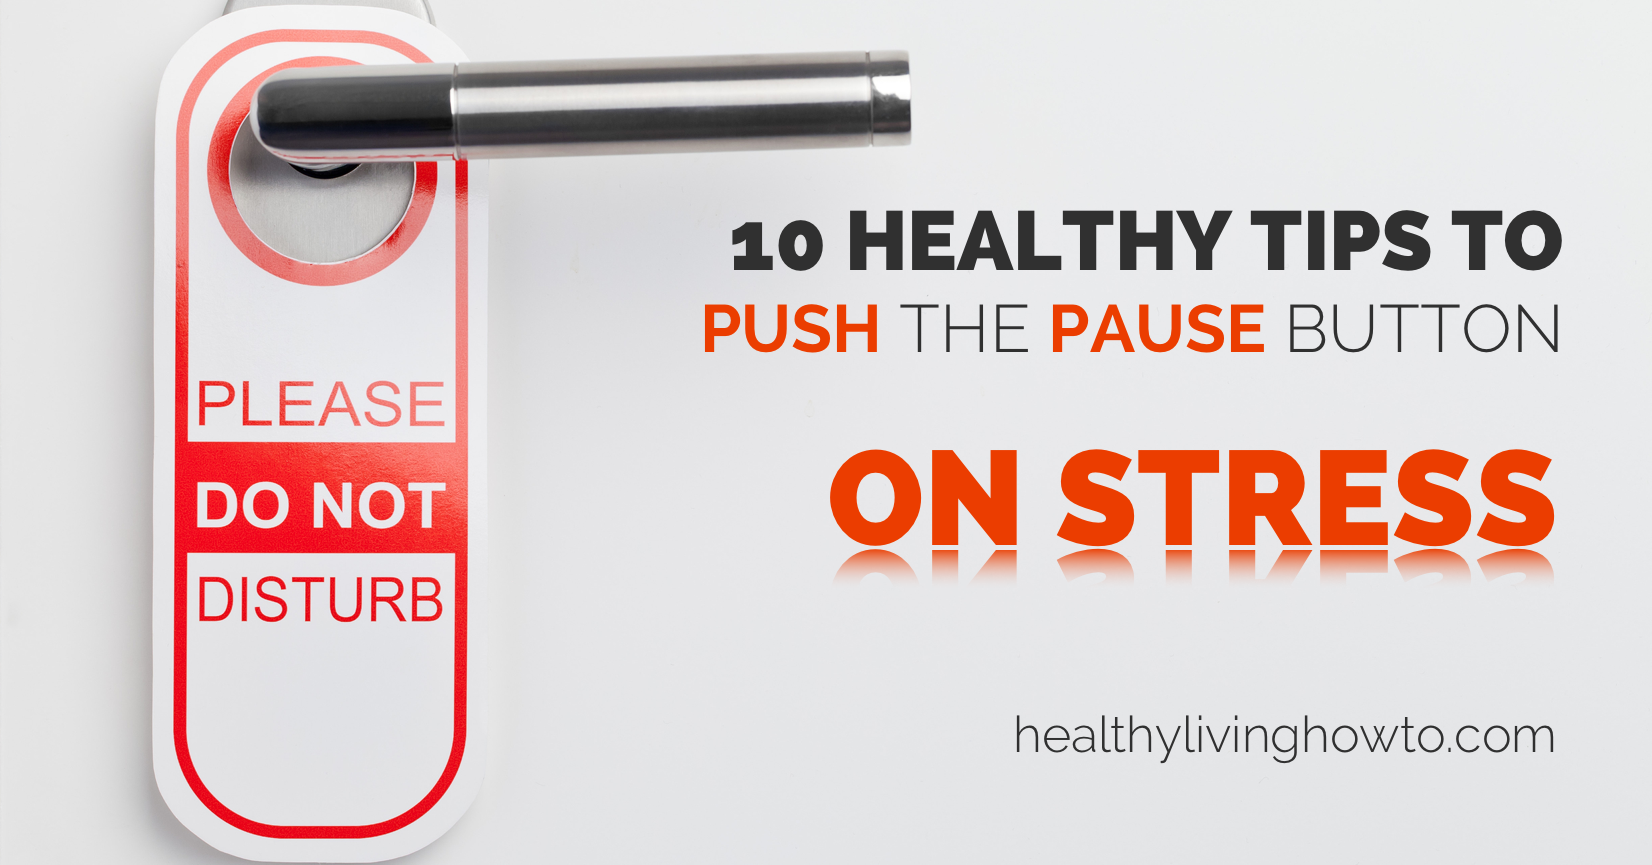 10 Healthy Tips To Push The Pause Button On Stress | healthylivinghowto.com